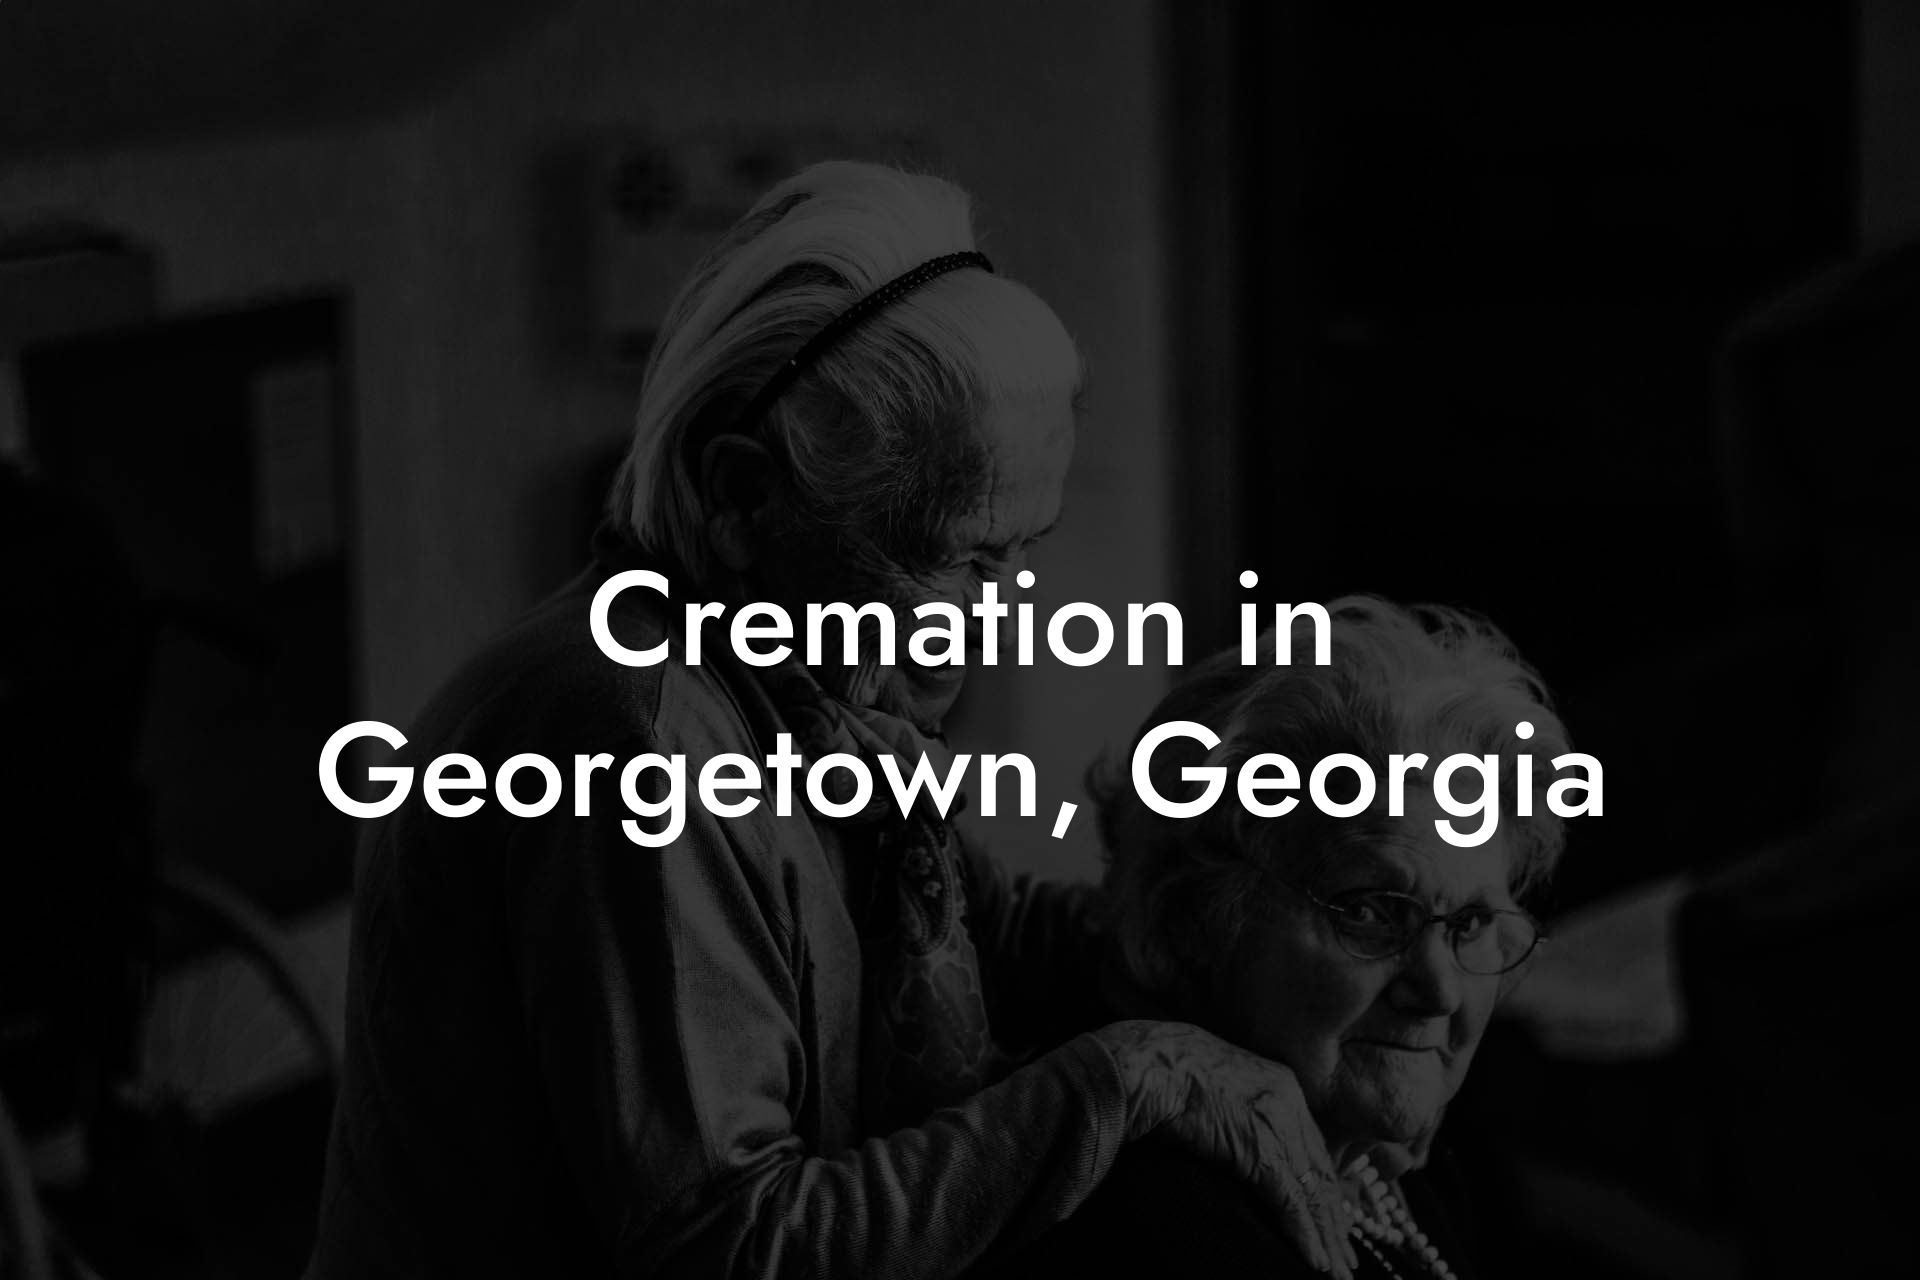 Cremation in Georgetown, Georgia